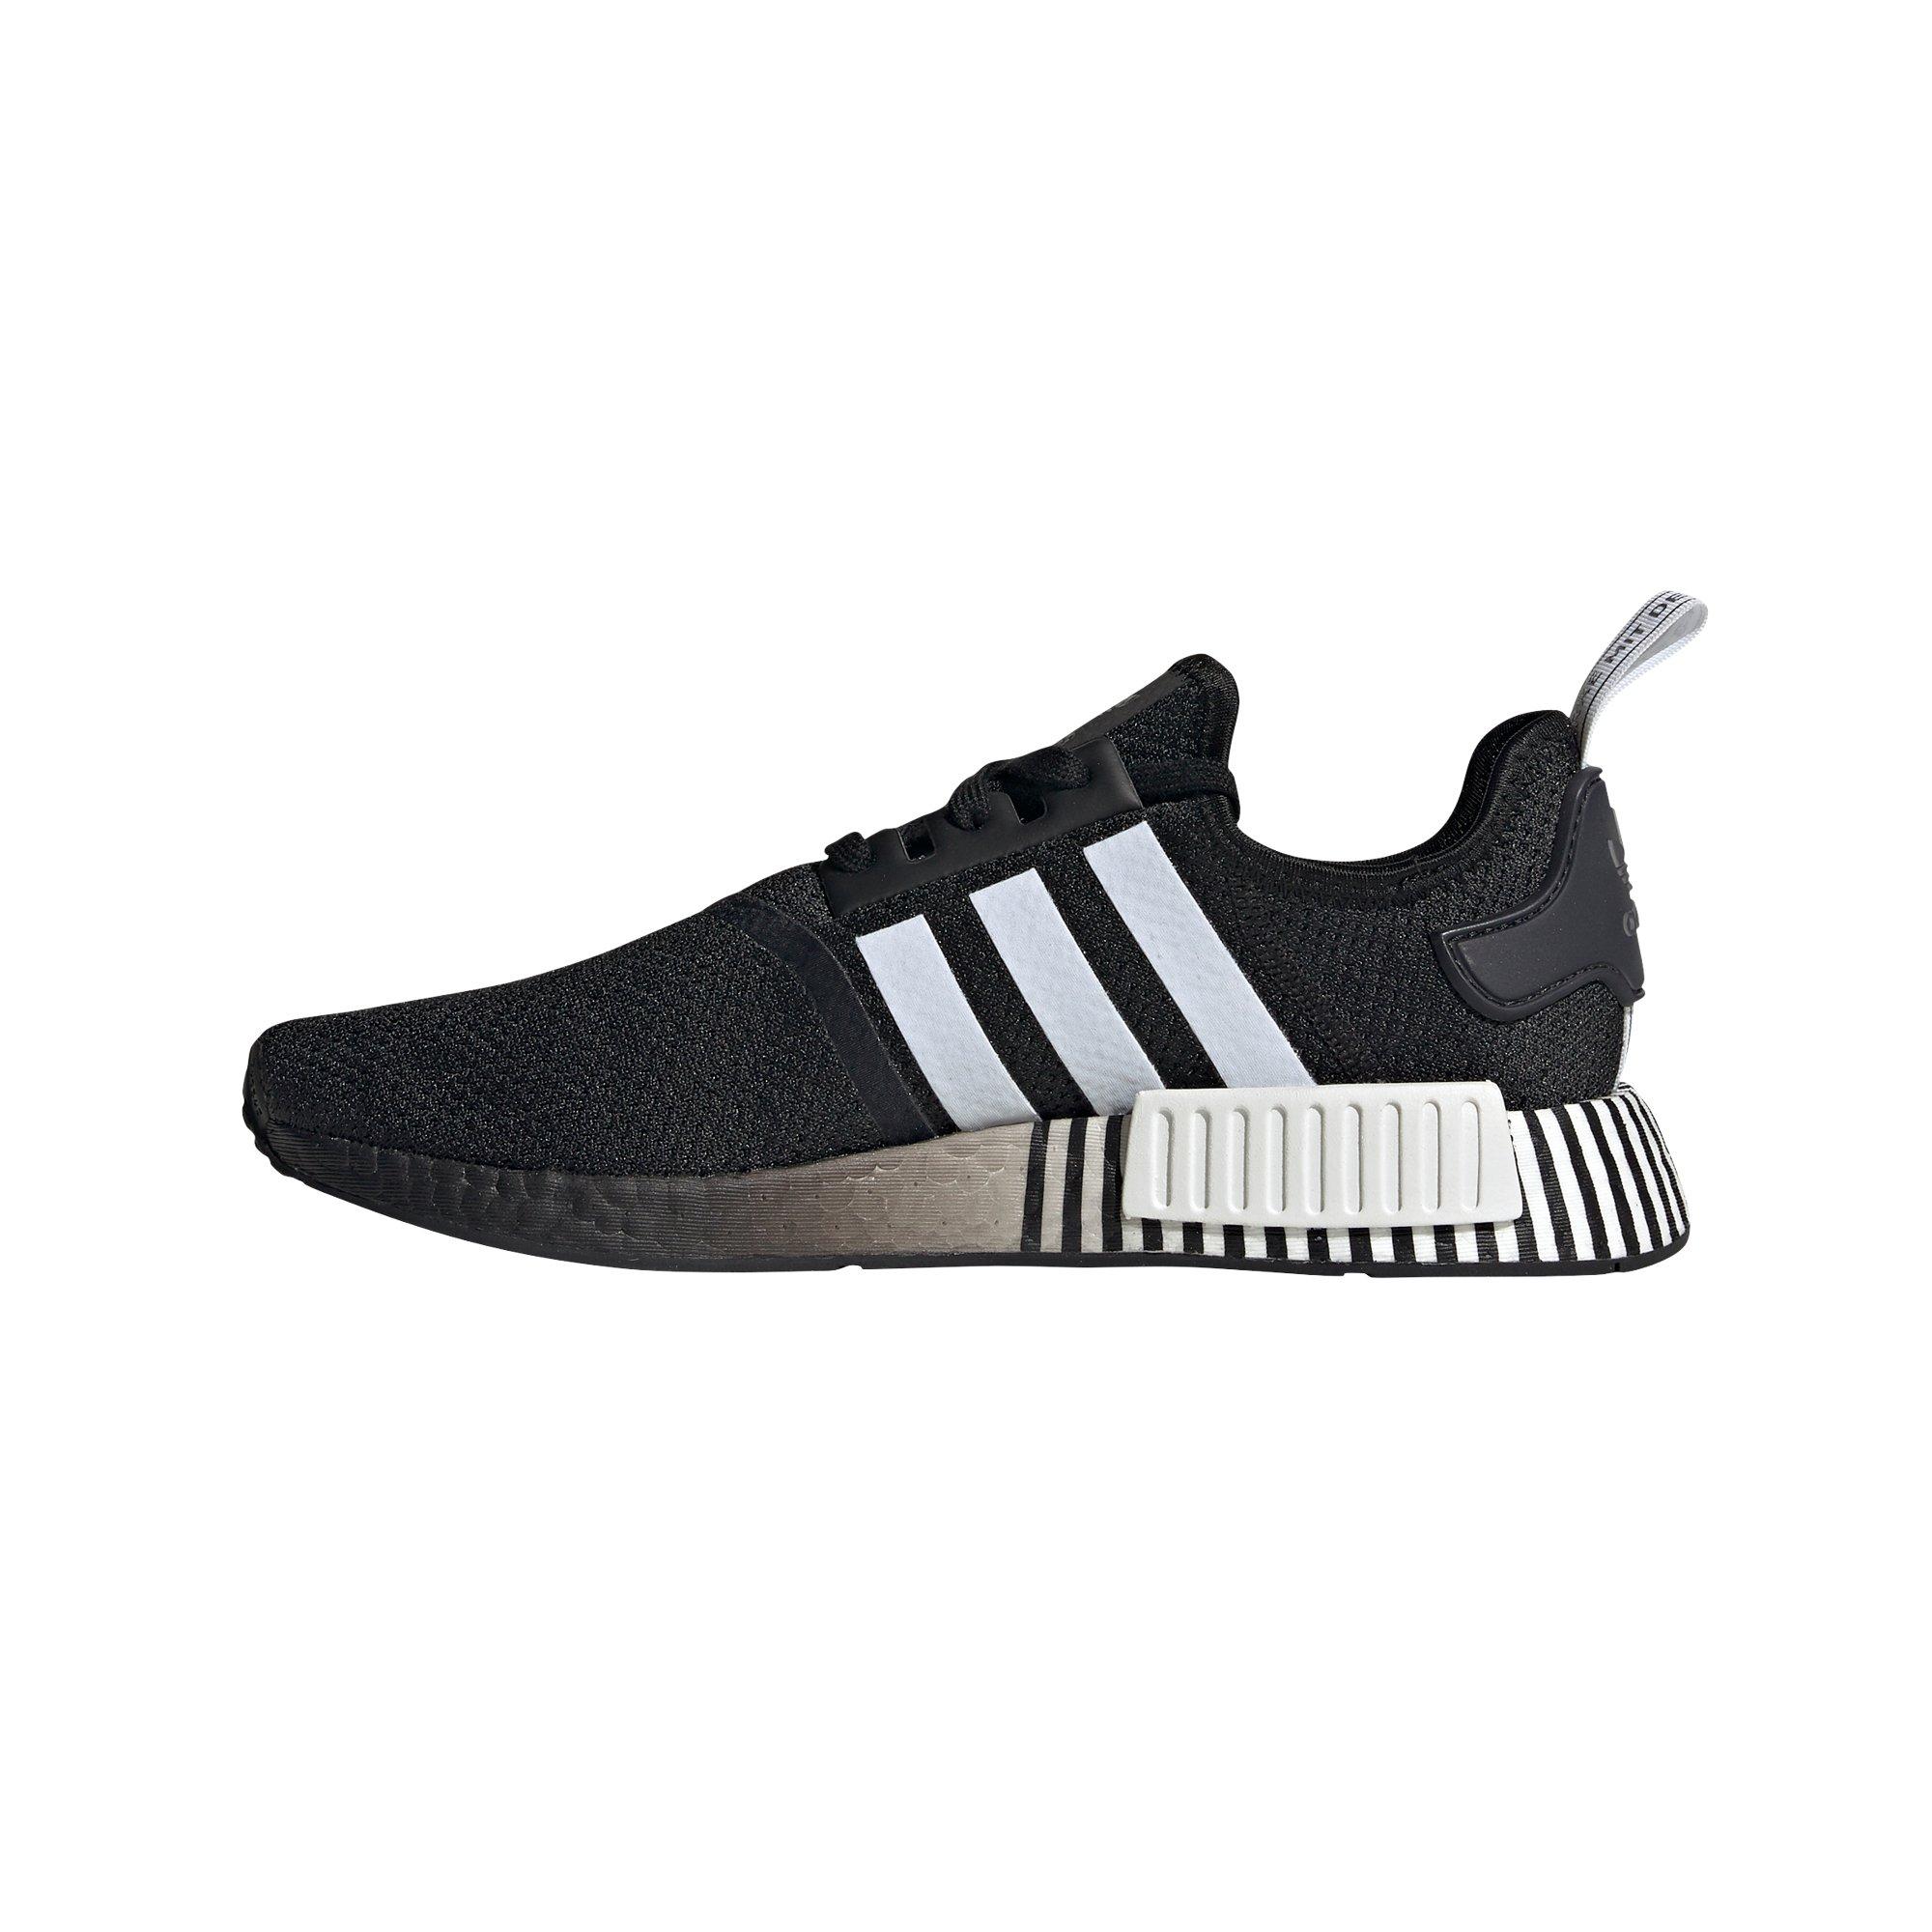 nmd faded black